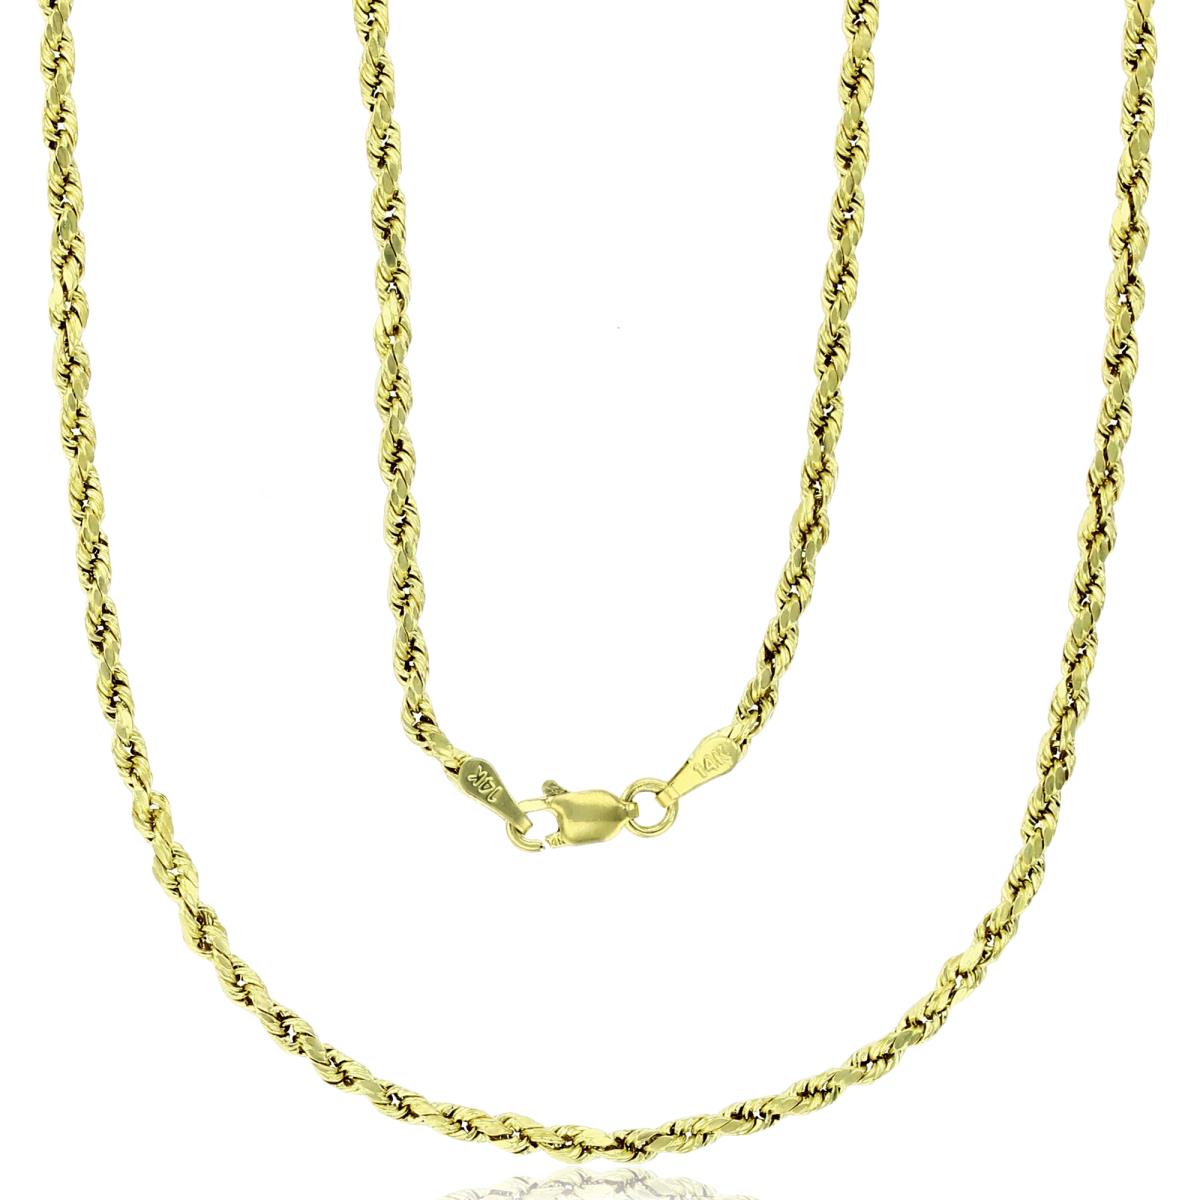 10k Yellow Gold 2.5mm DC Hollow Rope 018 10" Chain Anklet